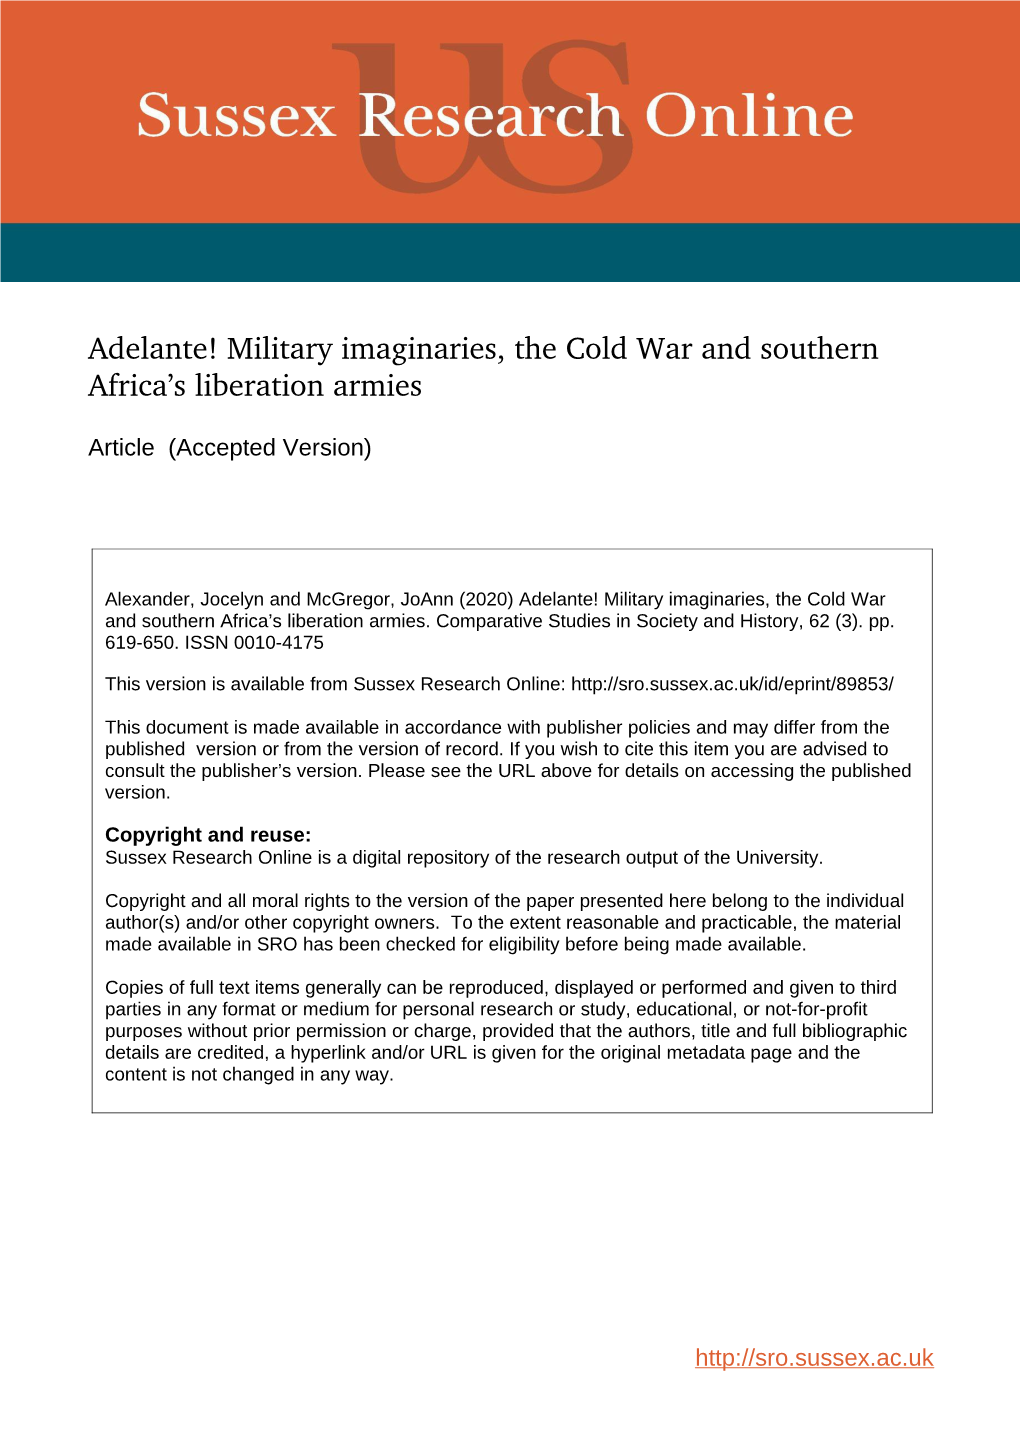 Adelante! Military Imaginaries, the Cold War and Southern Africa's